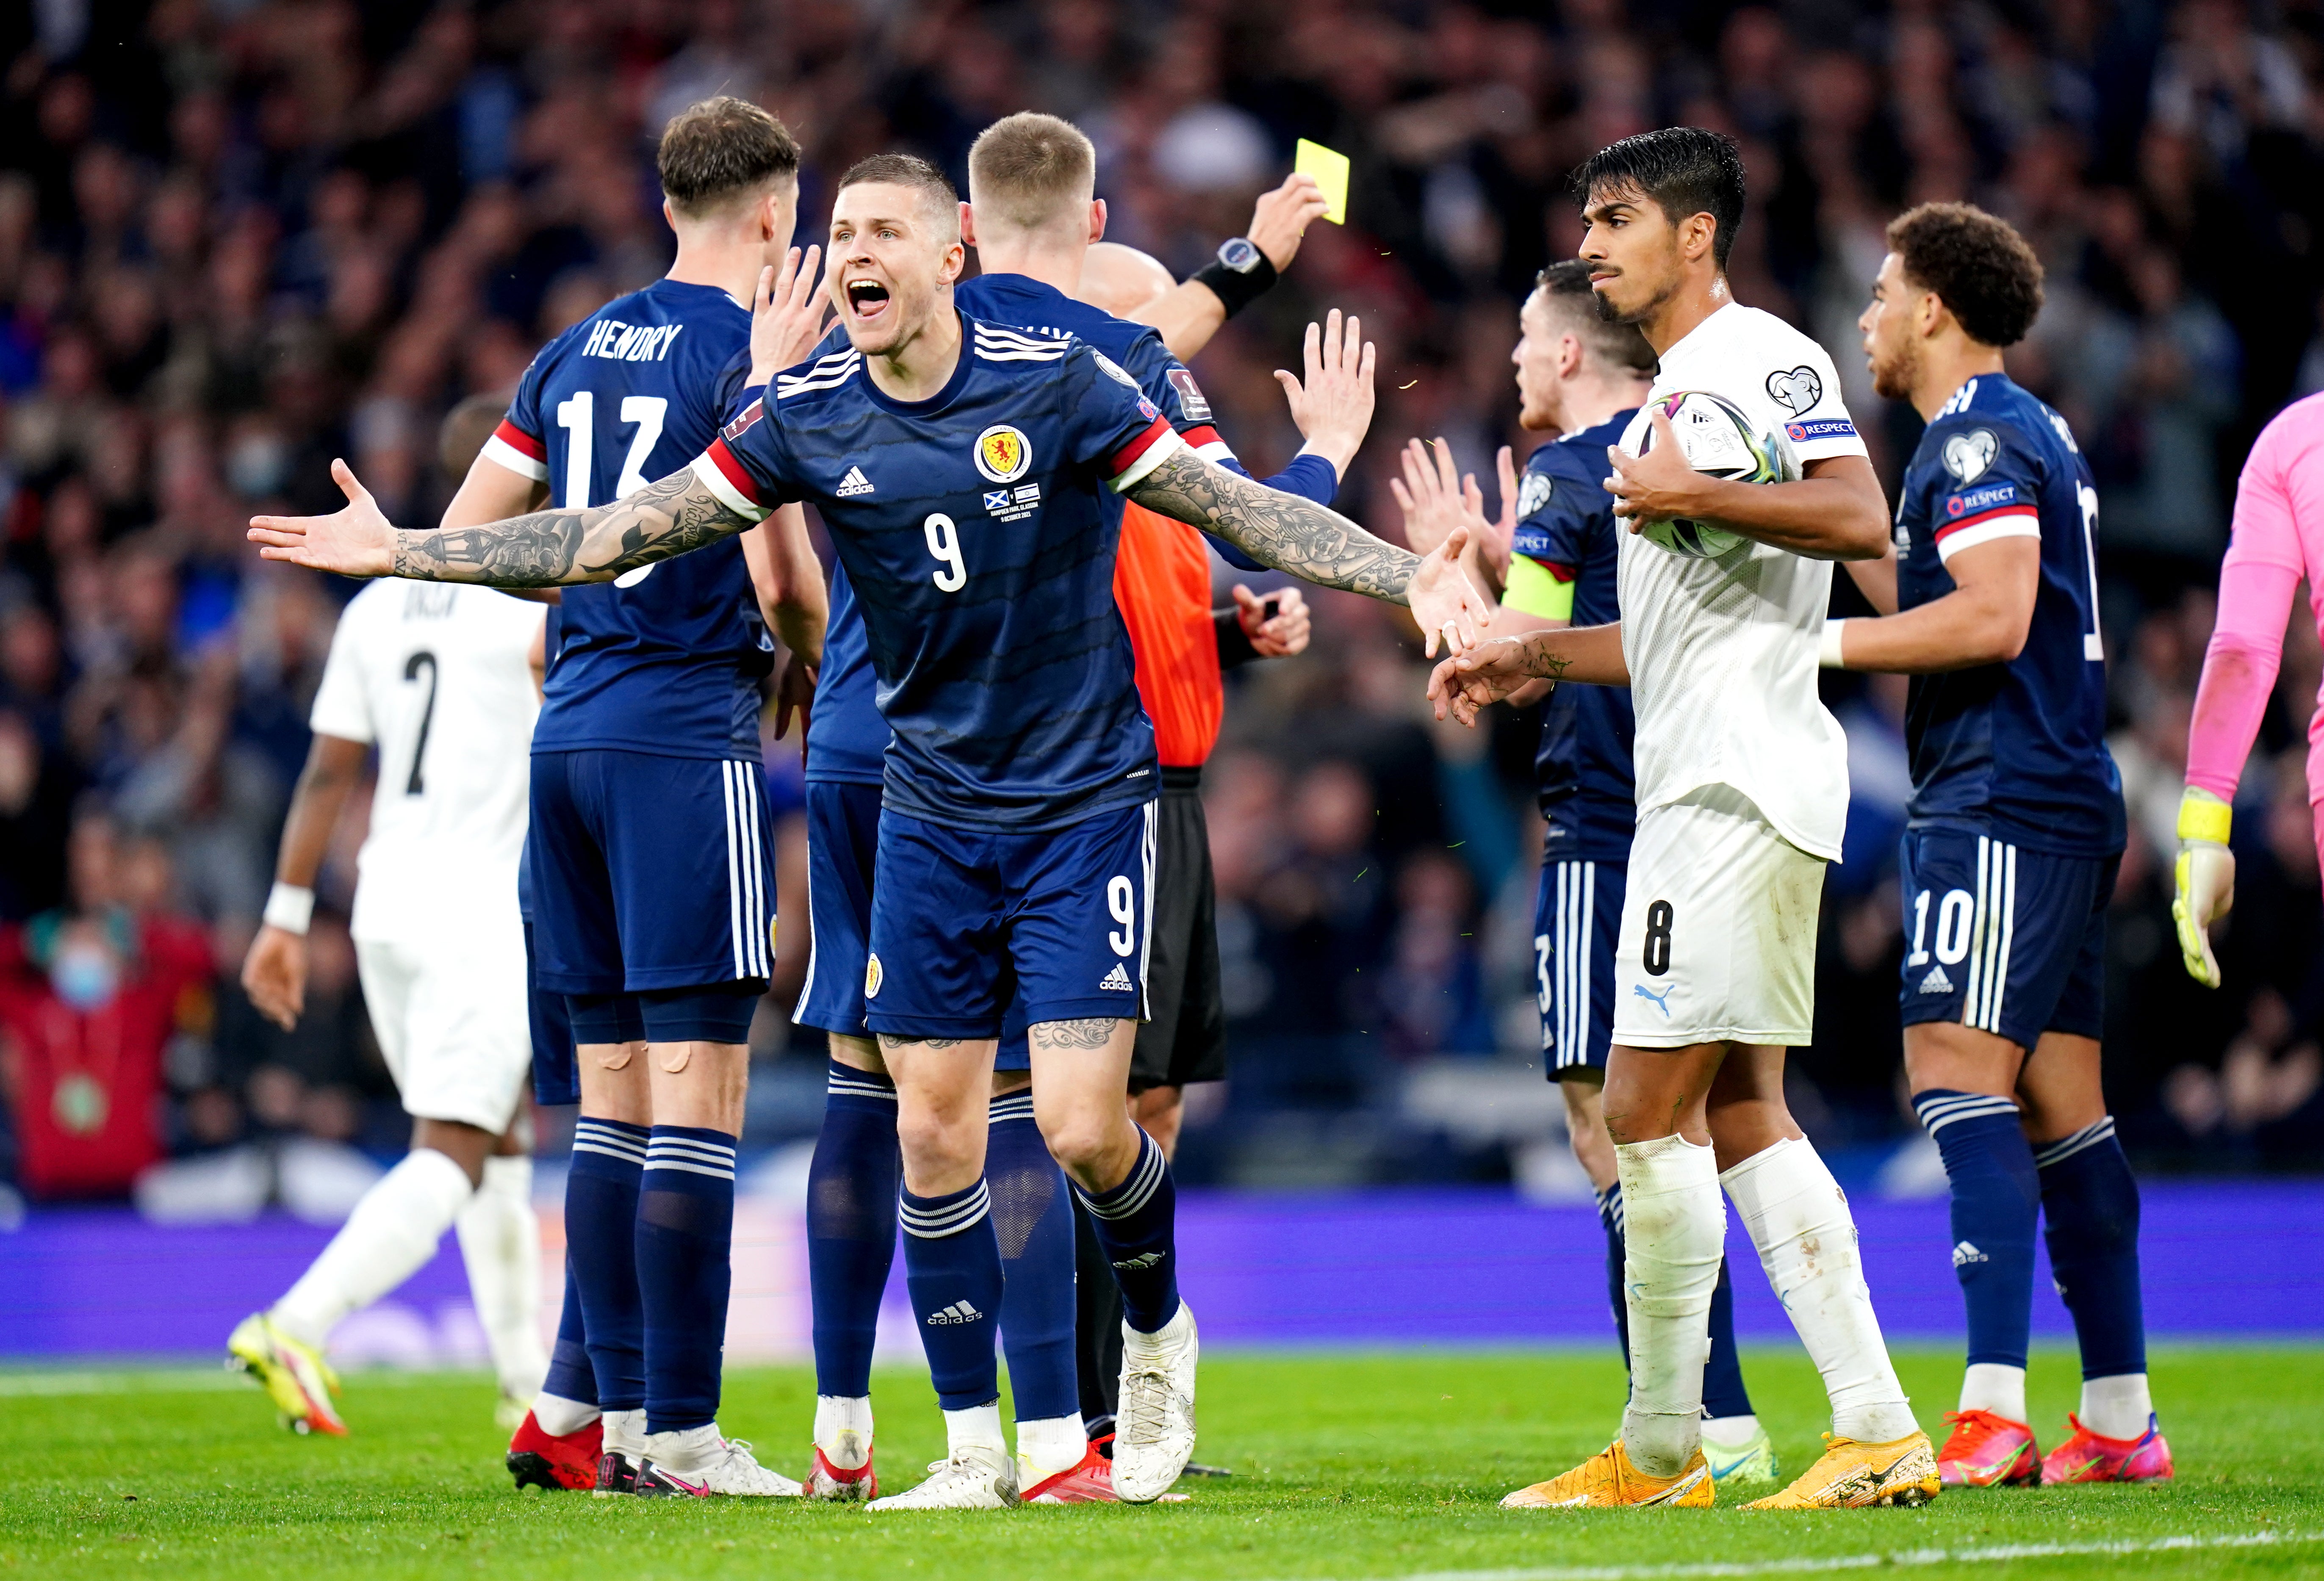 Scotland’s Lyndon Dykes reacts after his goal is disallowed (Jane Barlow/PA)